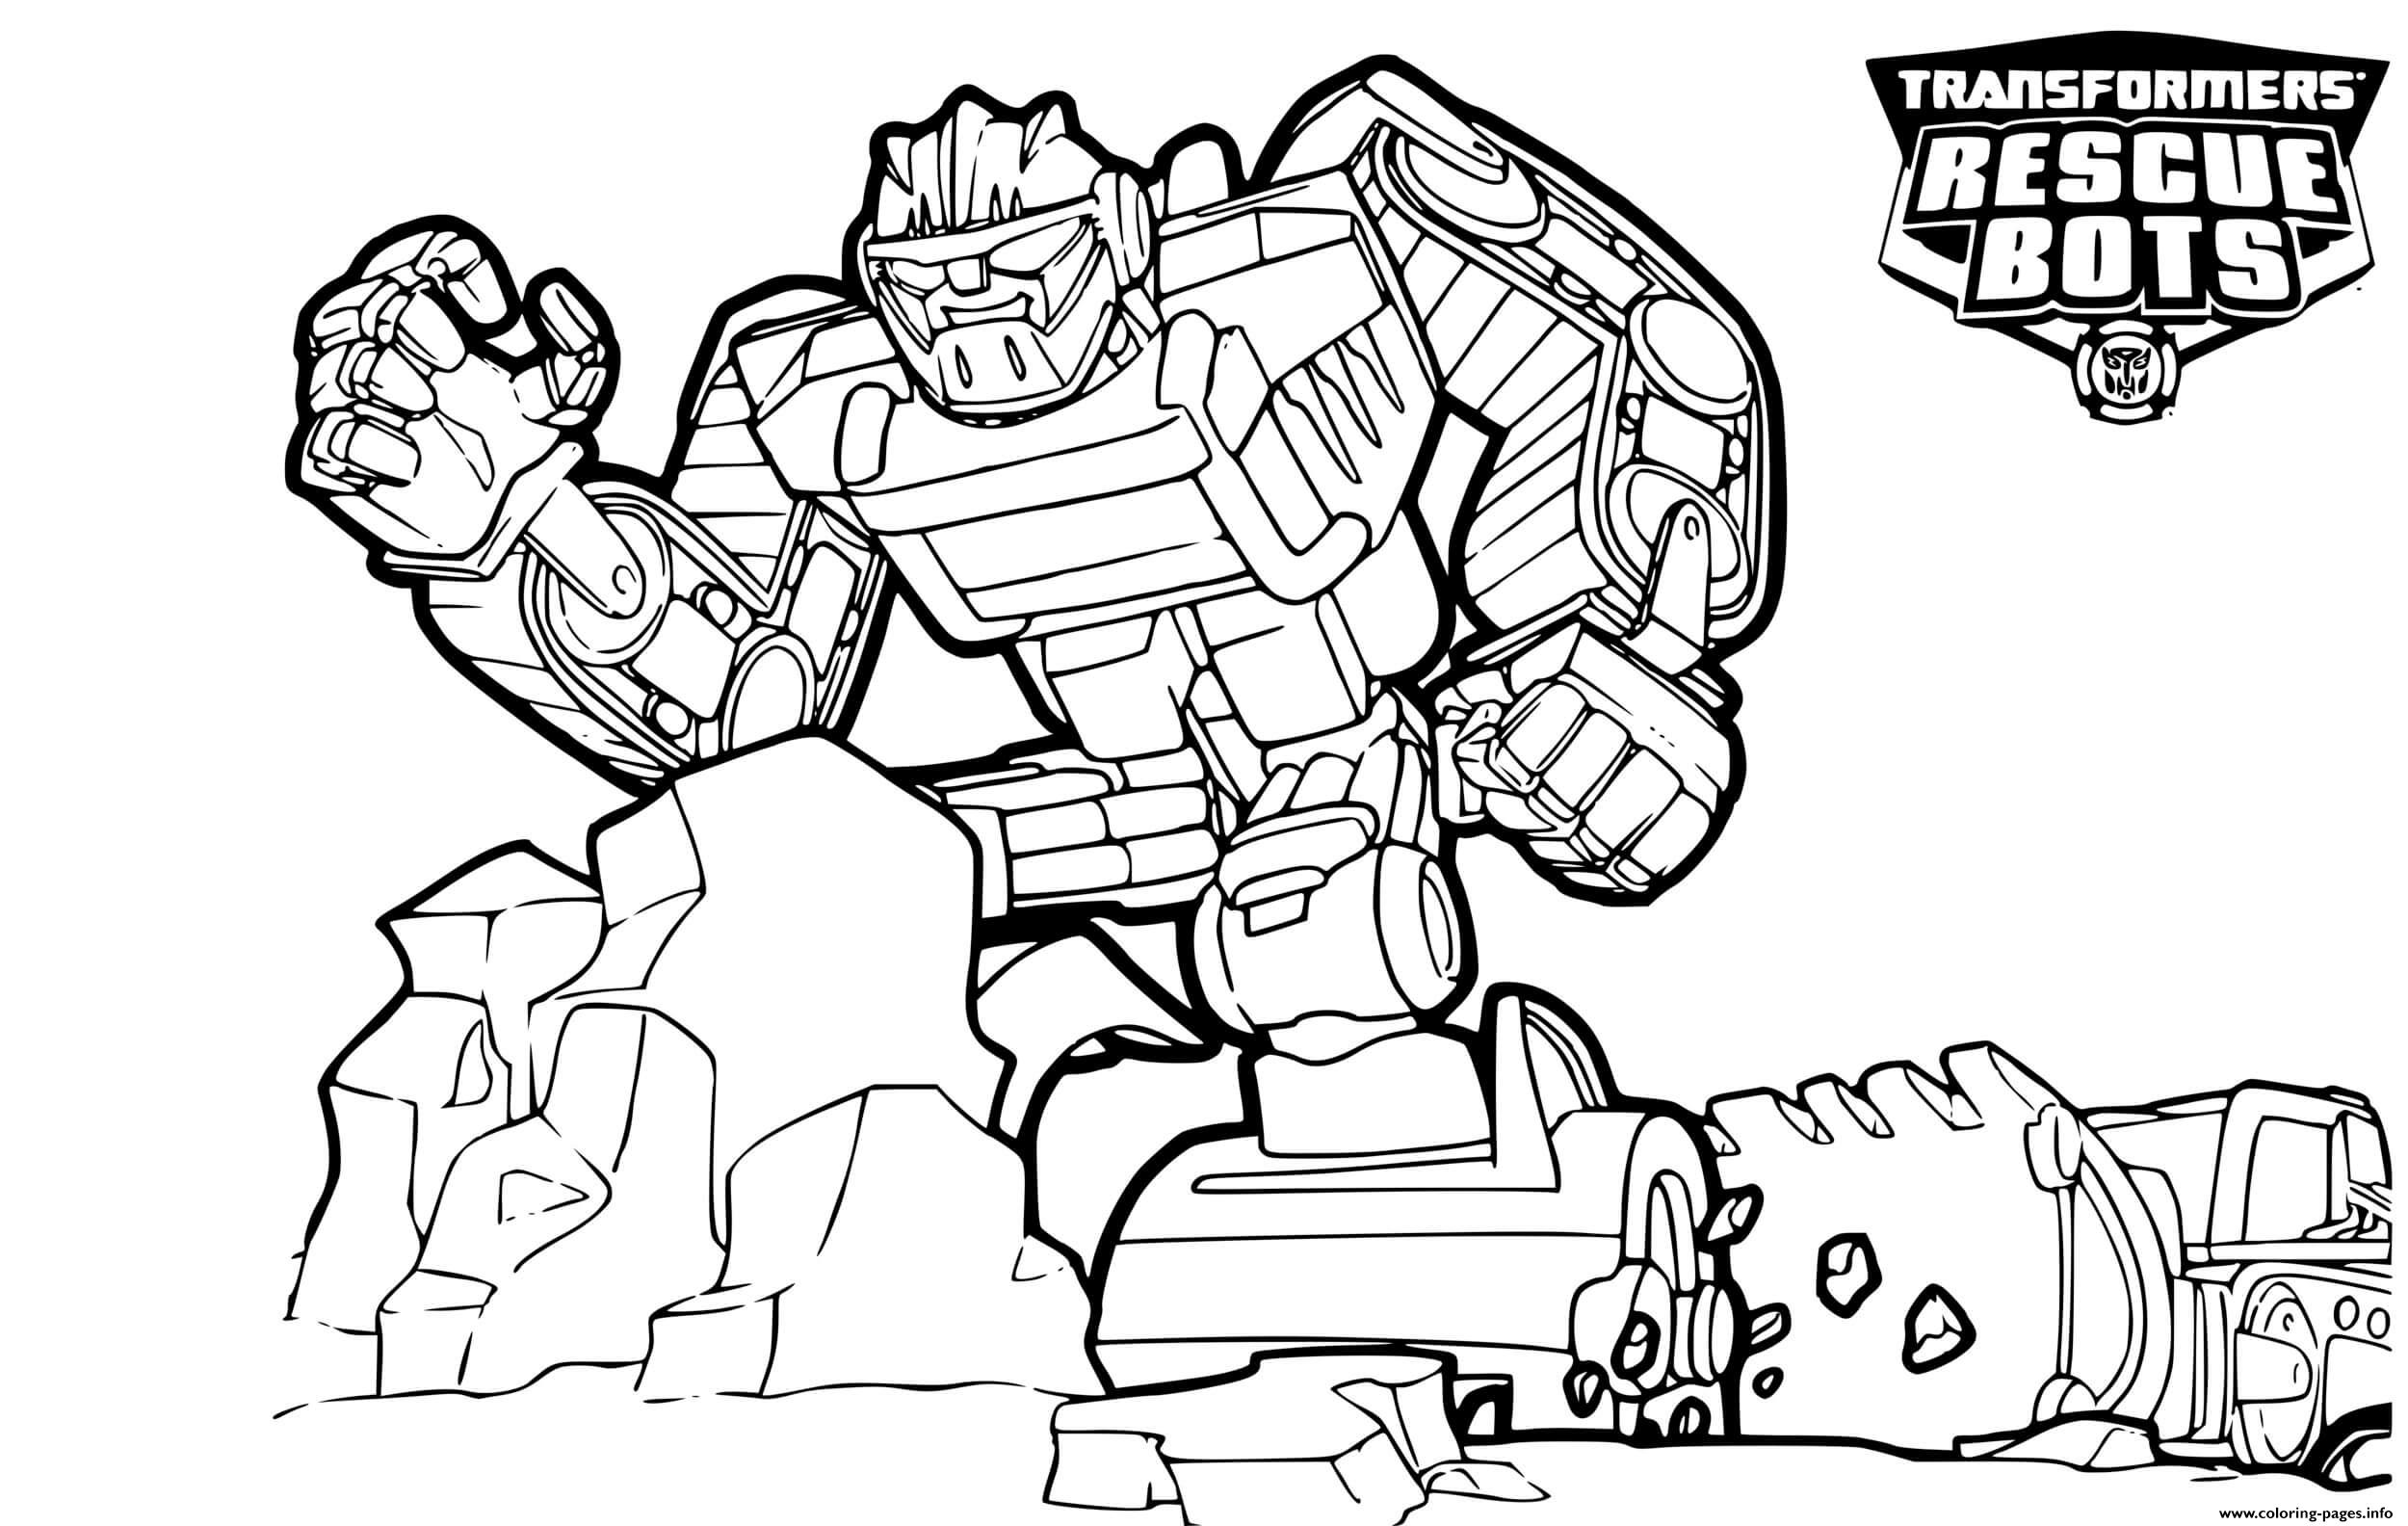 Download Transformers Rescue Bots Boulder Line Drawing Coloring ...